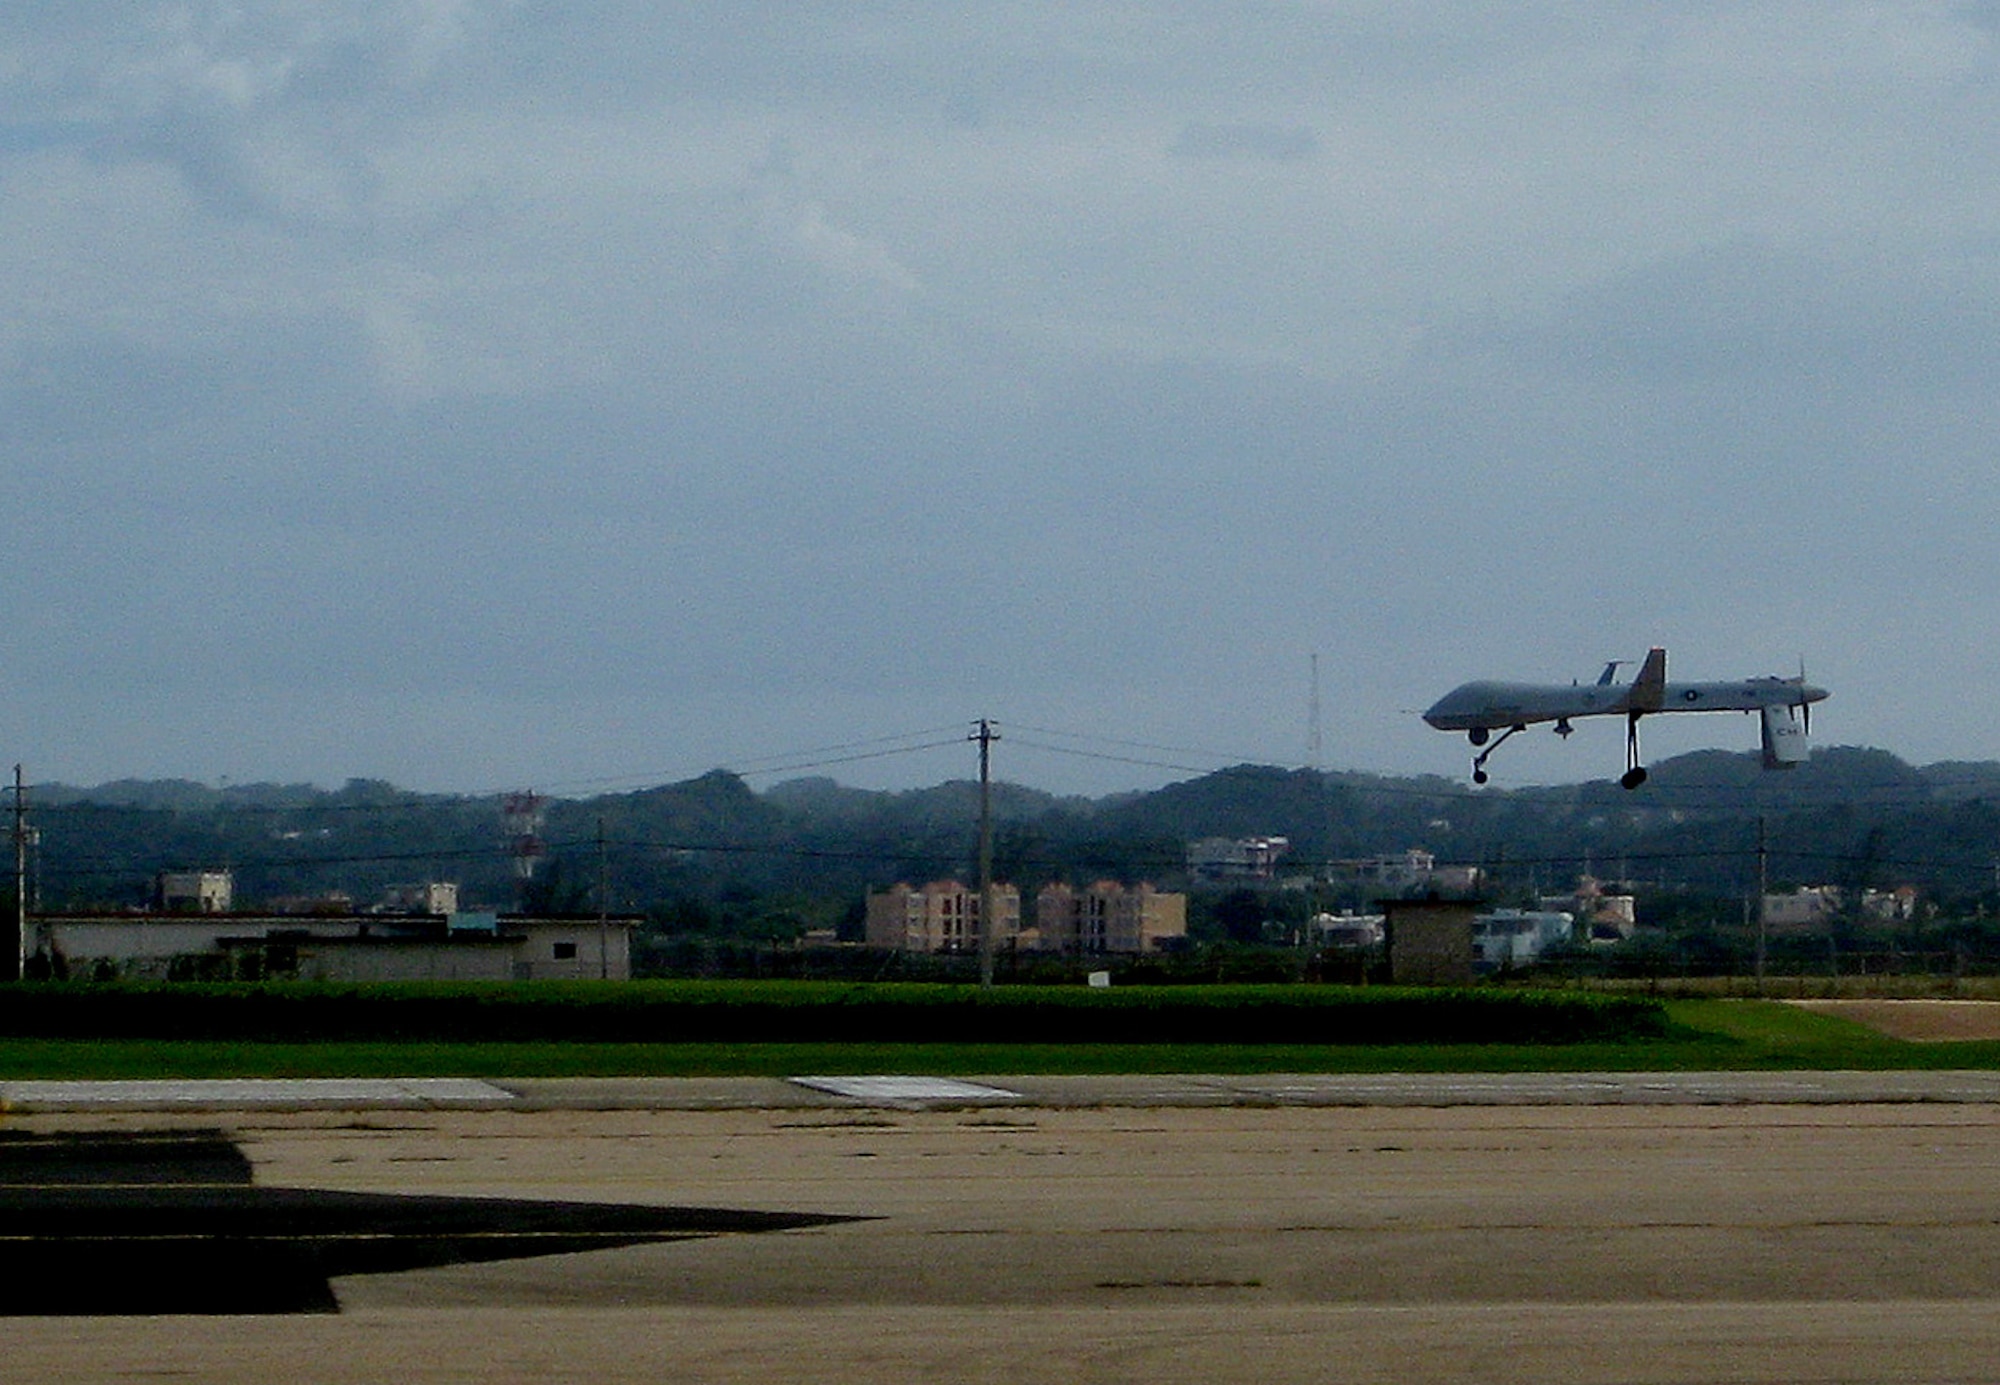 An RQ-1 Predator lands at Aeropuerto Rafael Hernandez outside Aquadilla, Puerto Rico on 27 Jan., 2010.  The RQ-1 remotely piloted systems are operating out of Puerto Rico to support Operation Unified Response in Haiti.  Airmen from Creech Air Force Base, Las Vegas, Nev. are providing 24 hour a day full-motion video in real time to international relief workers on the ground in order to speed humanitarian aid to remote and cut-off areas of the country following the earthquake on 12 Jan., 2010. (U.S. Air Force photo by Maj. Jeff Bright)